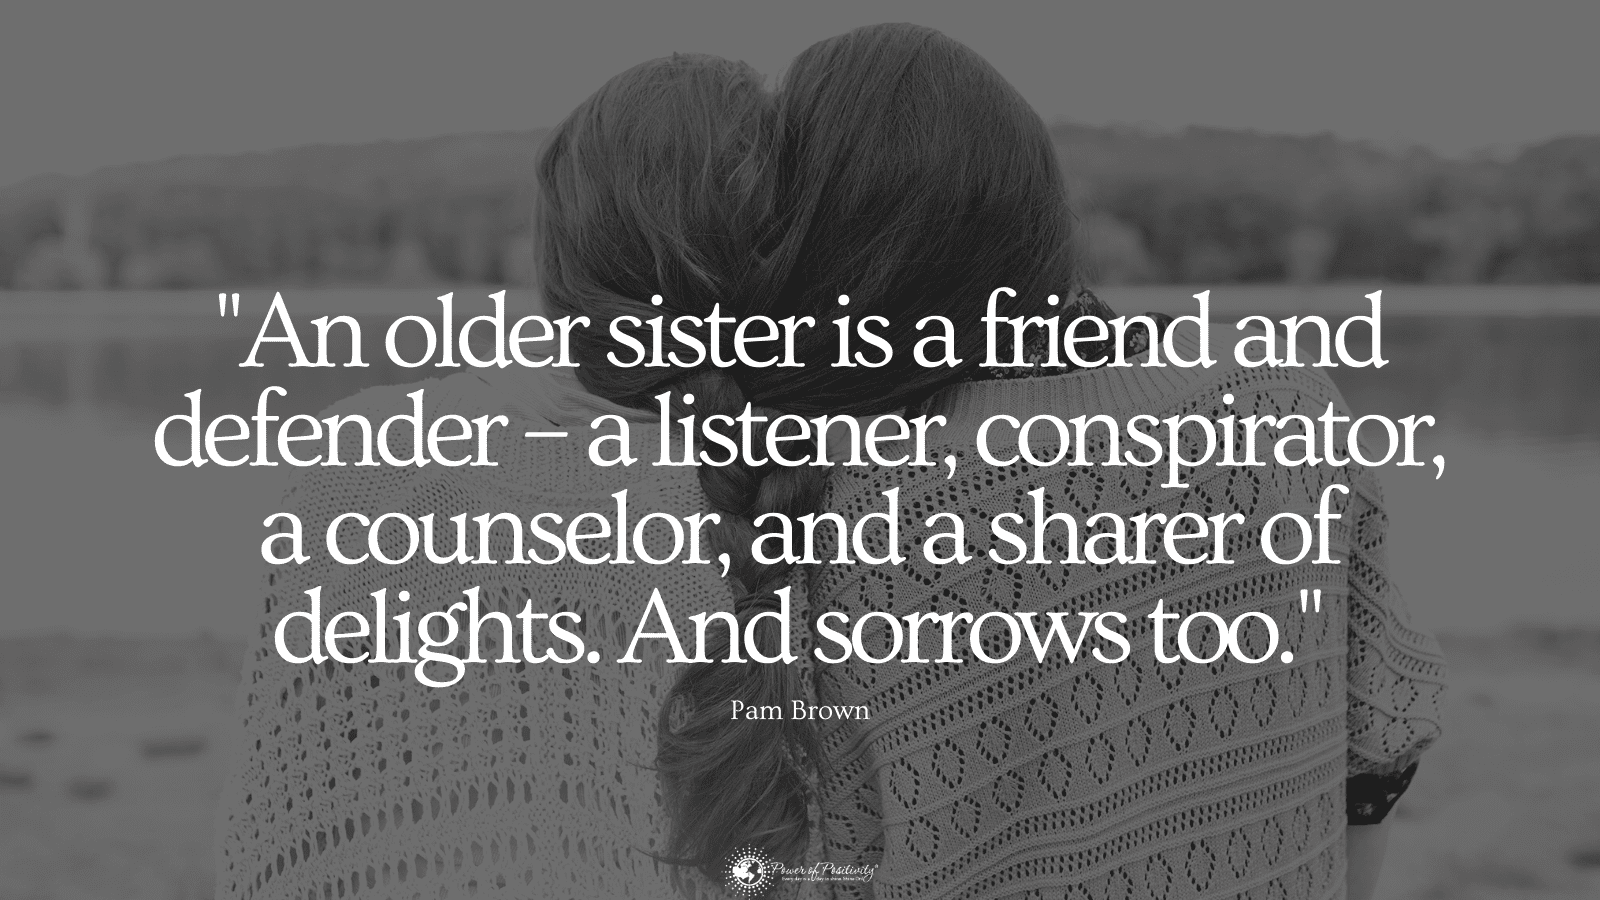 Share These 15 Heartwarming Quotes on Sisters